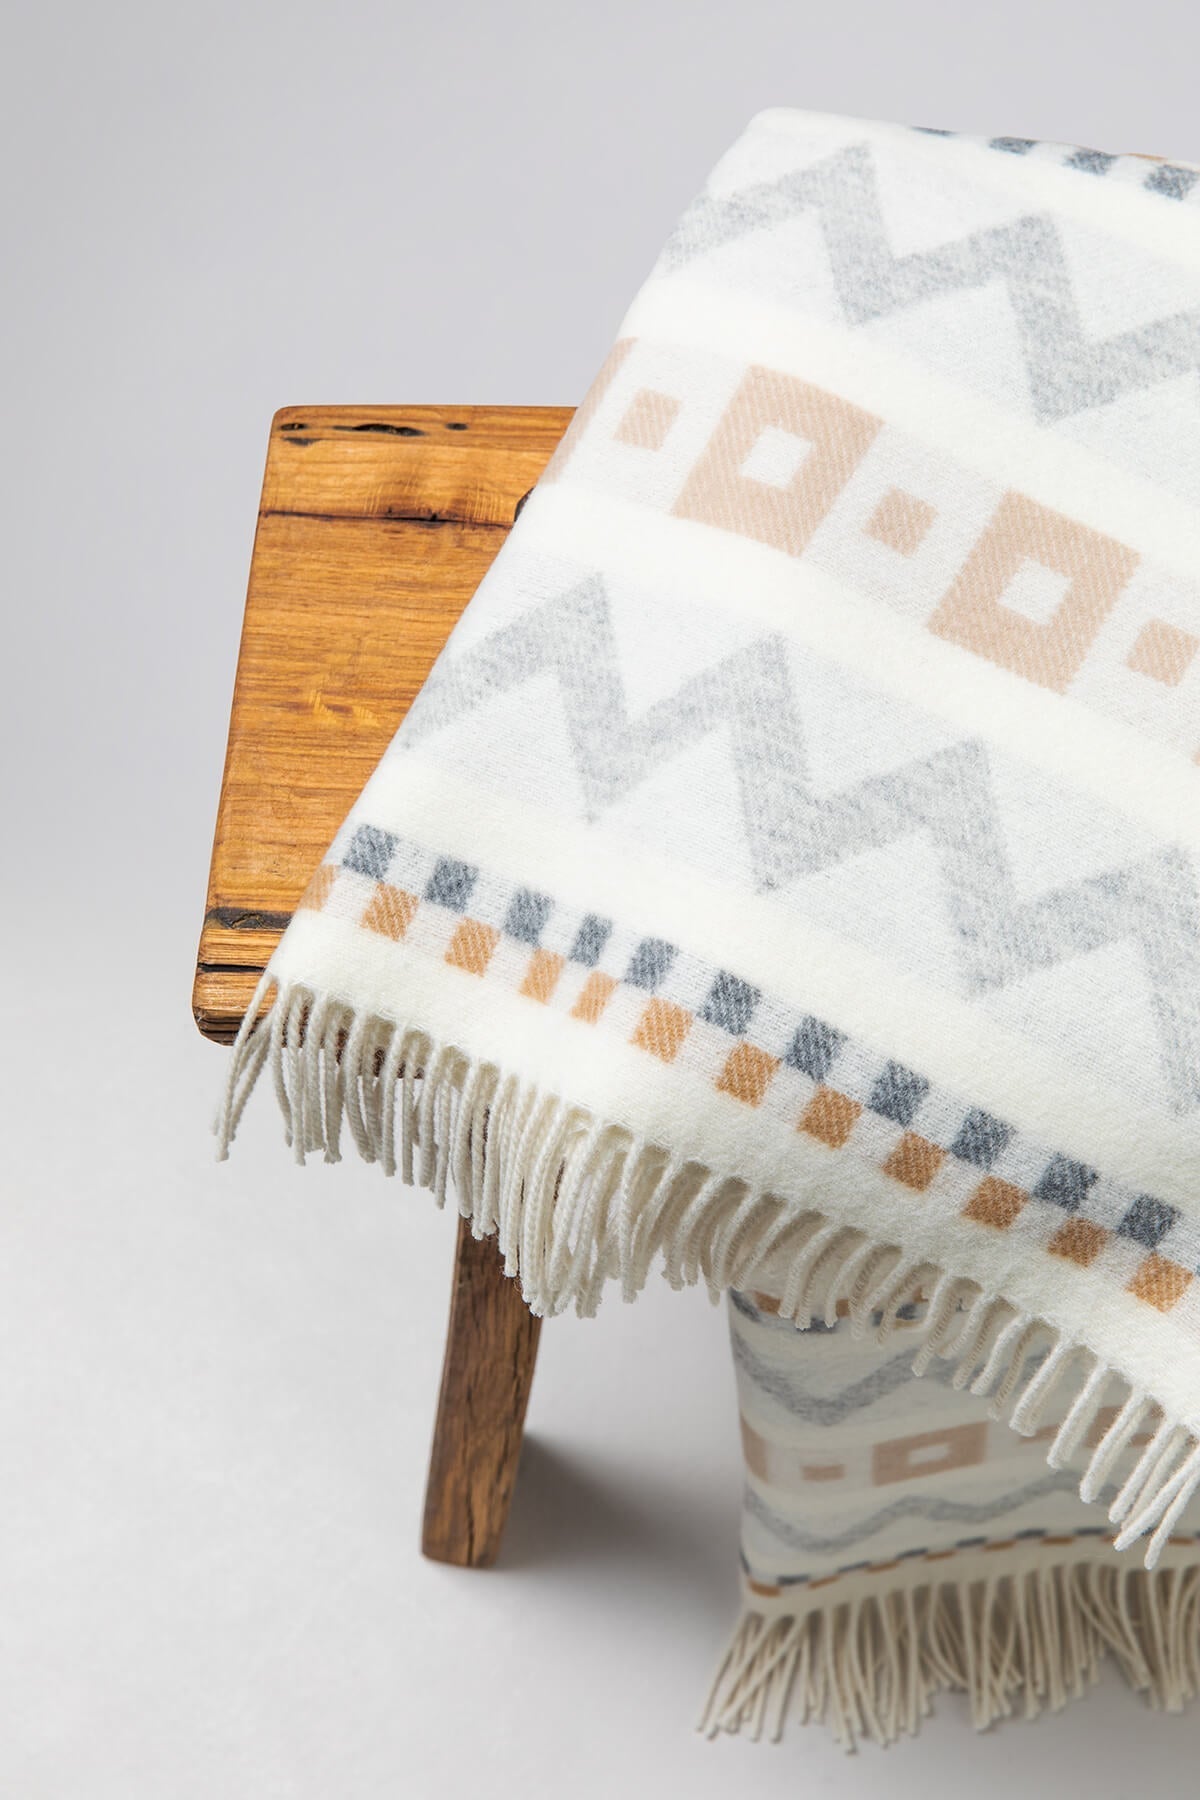 A small wooden stool with a Johnstons of Elgin Children's Zig Zag Blanket in shades of grey, camel, and cream on a soft grey background.WB002334RU7278ONE